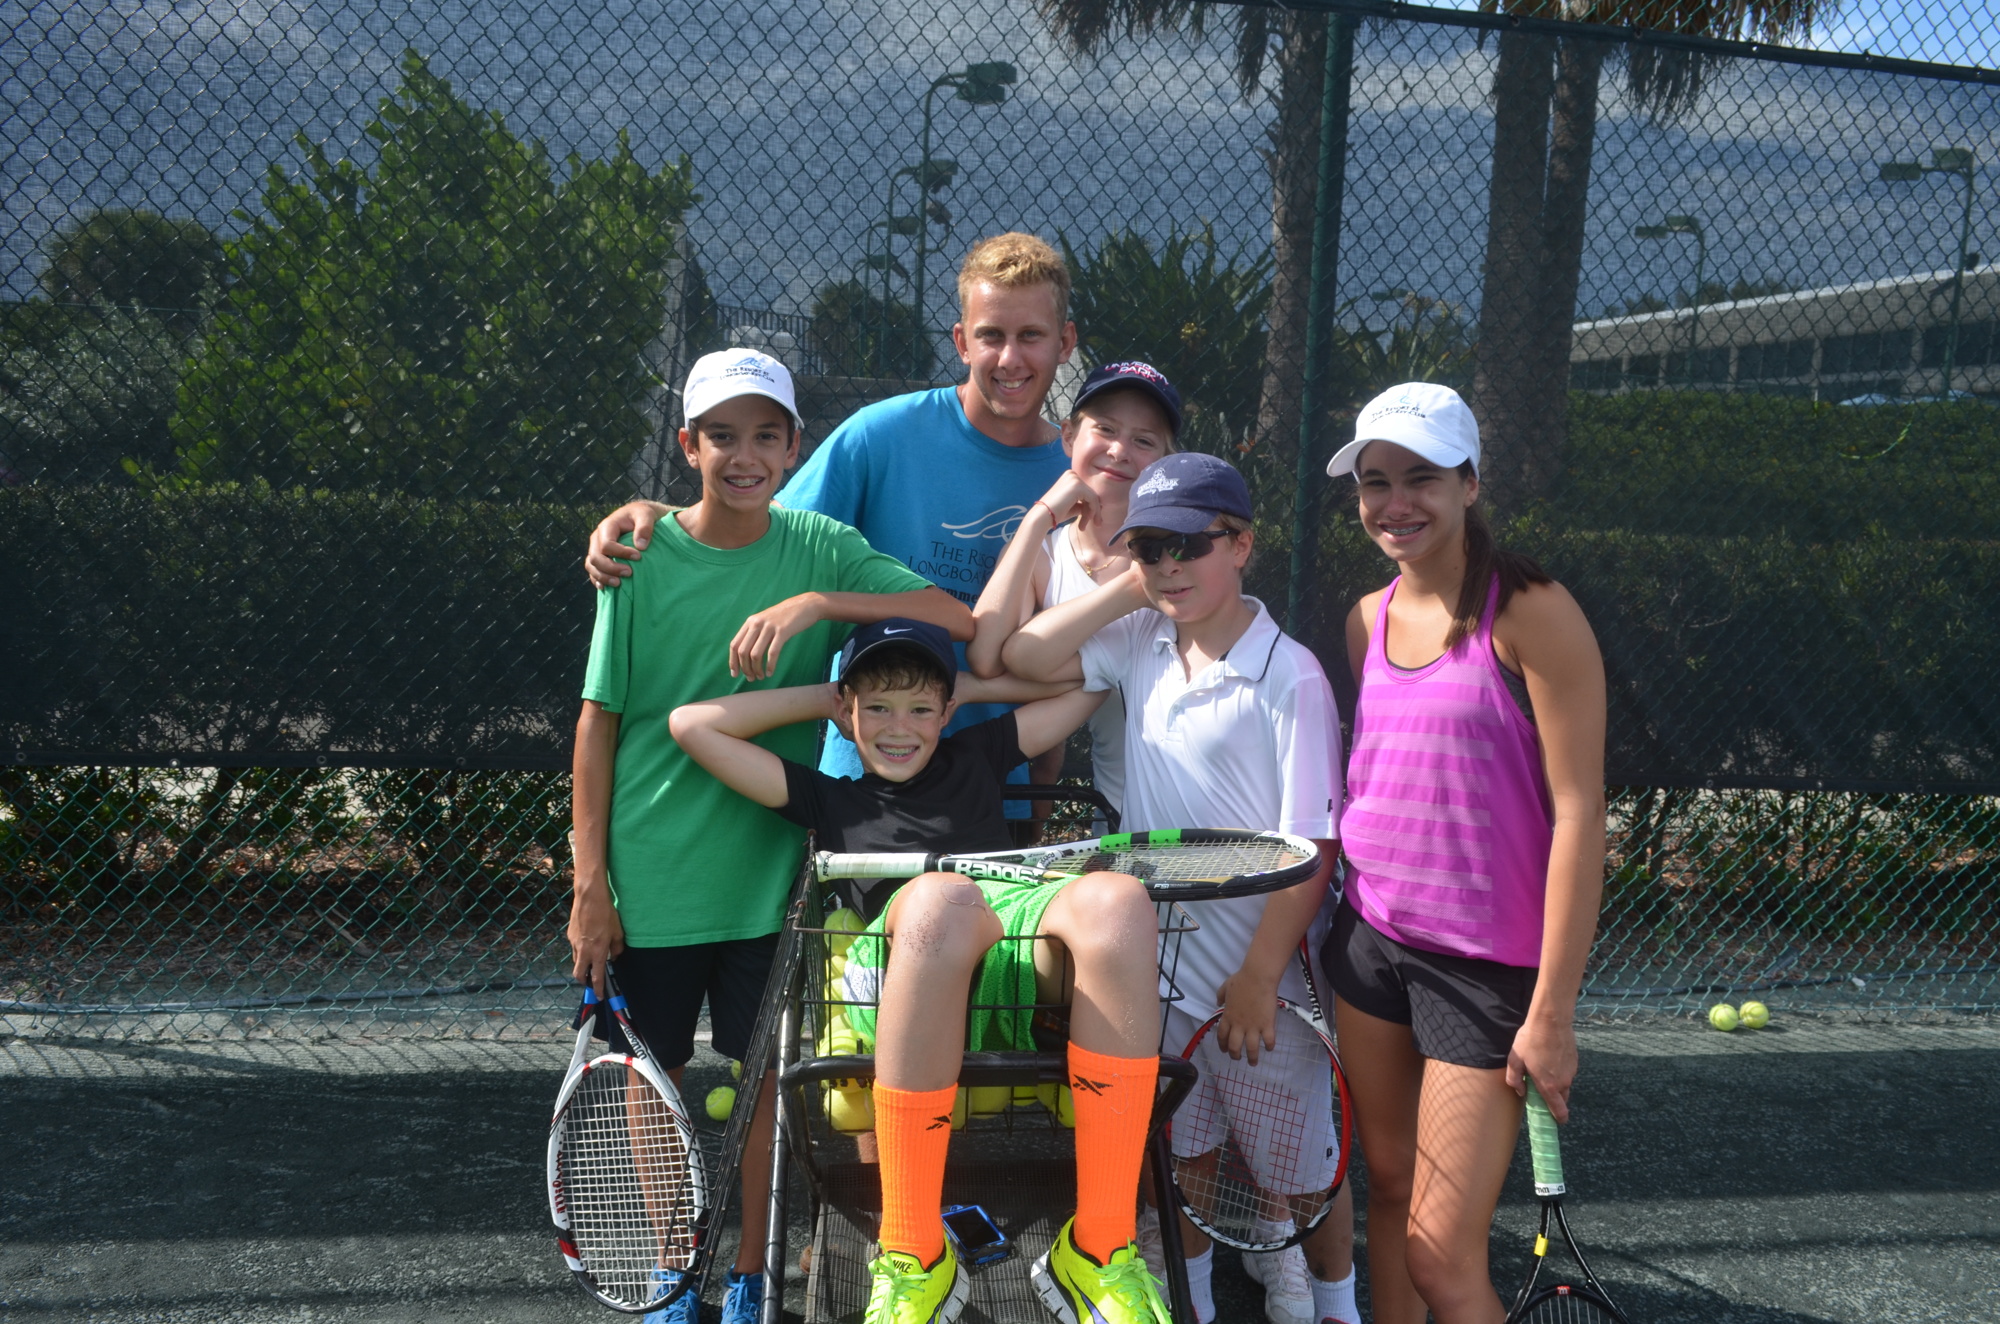 Everett Philipson, 12, Joey Carter, 10, coach Brett McDurfee, Alexia Pasold, 11, Max Pasold, 9, and Eugenie Philipson, 15, at last year's tennis camp at the Resort at Longboat Key Club.